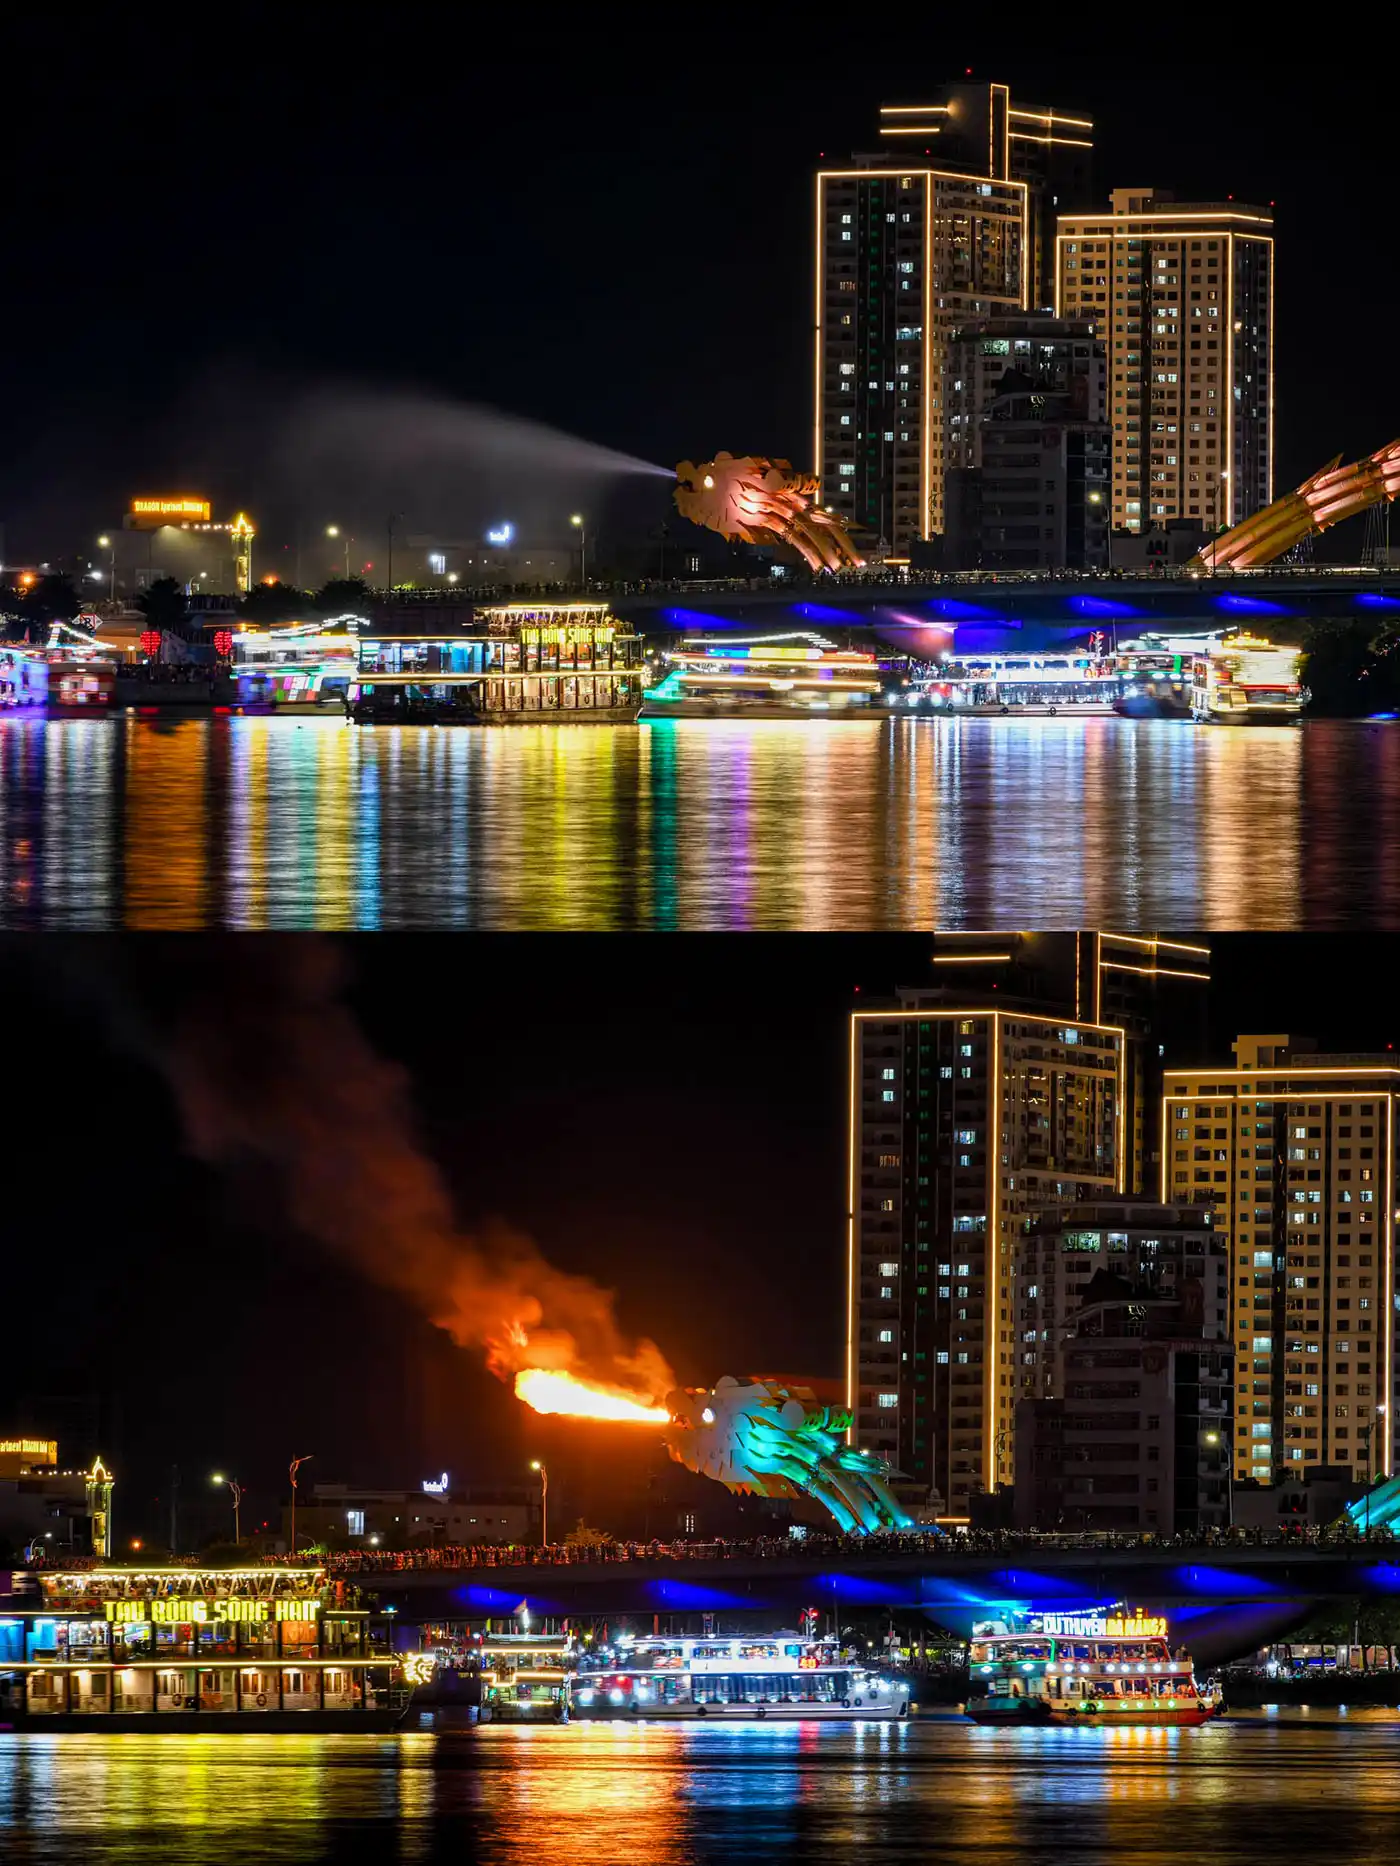 Dragon Bridge spits fire and water